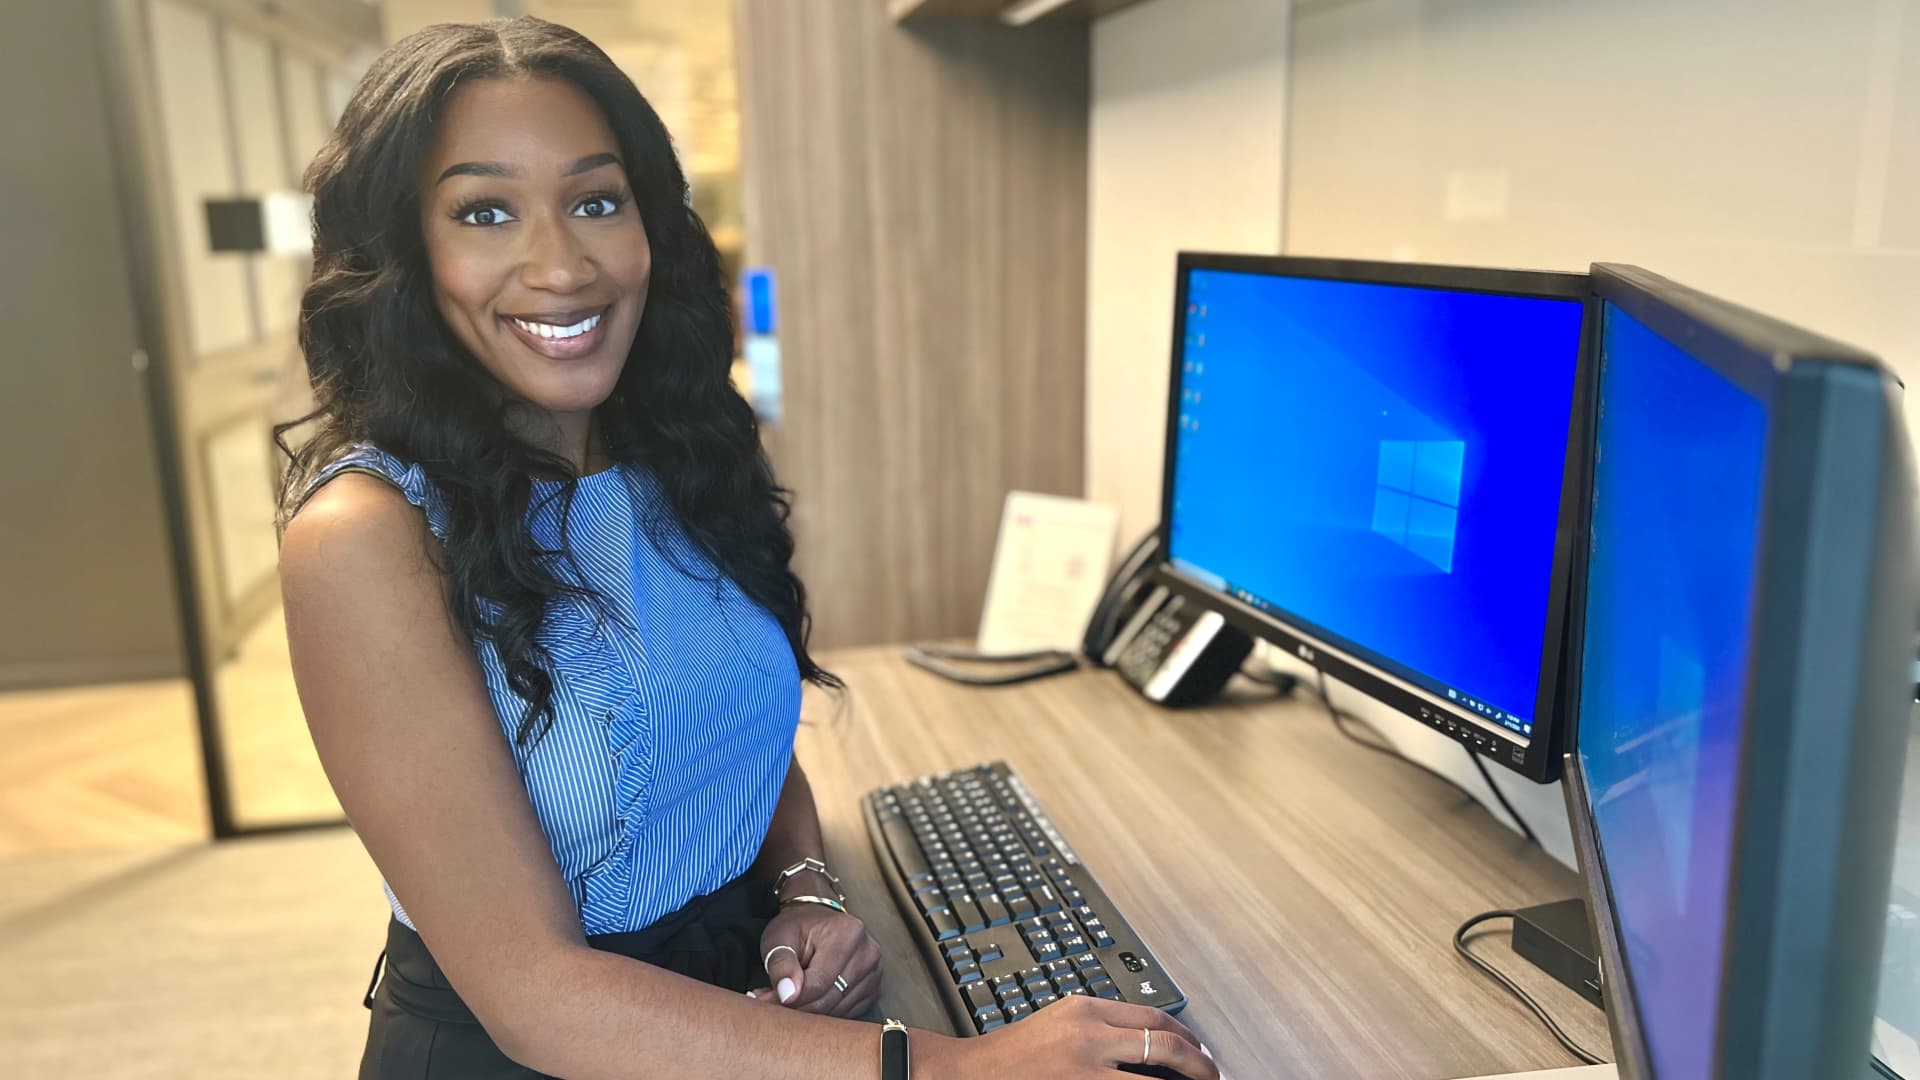 29-year-old was laid off from her hotel job in 2020—now she makes $125000 working in tech, without a bachelor's ... - CNBC